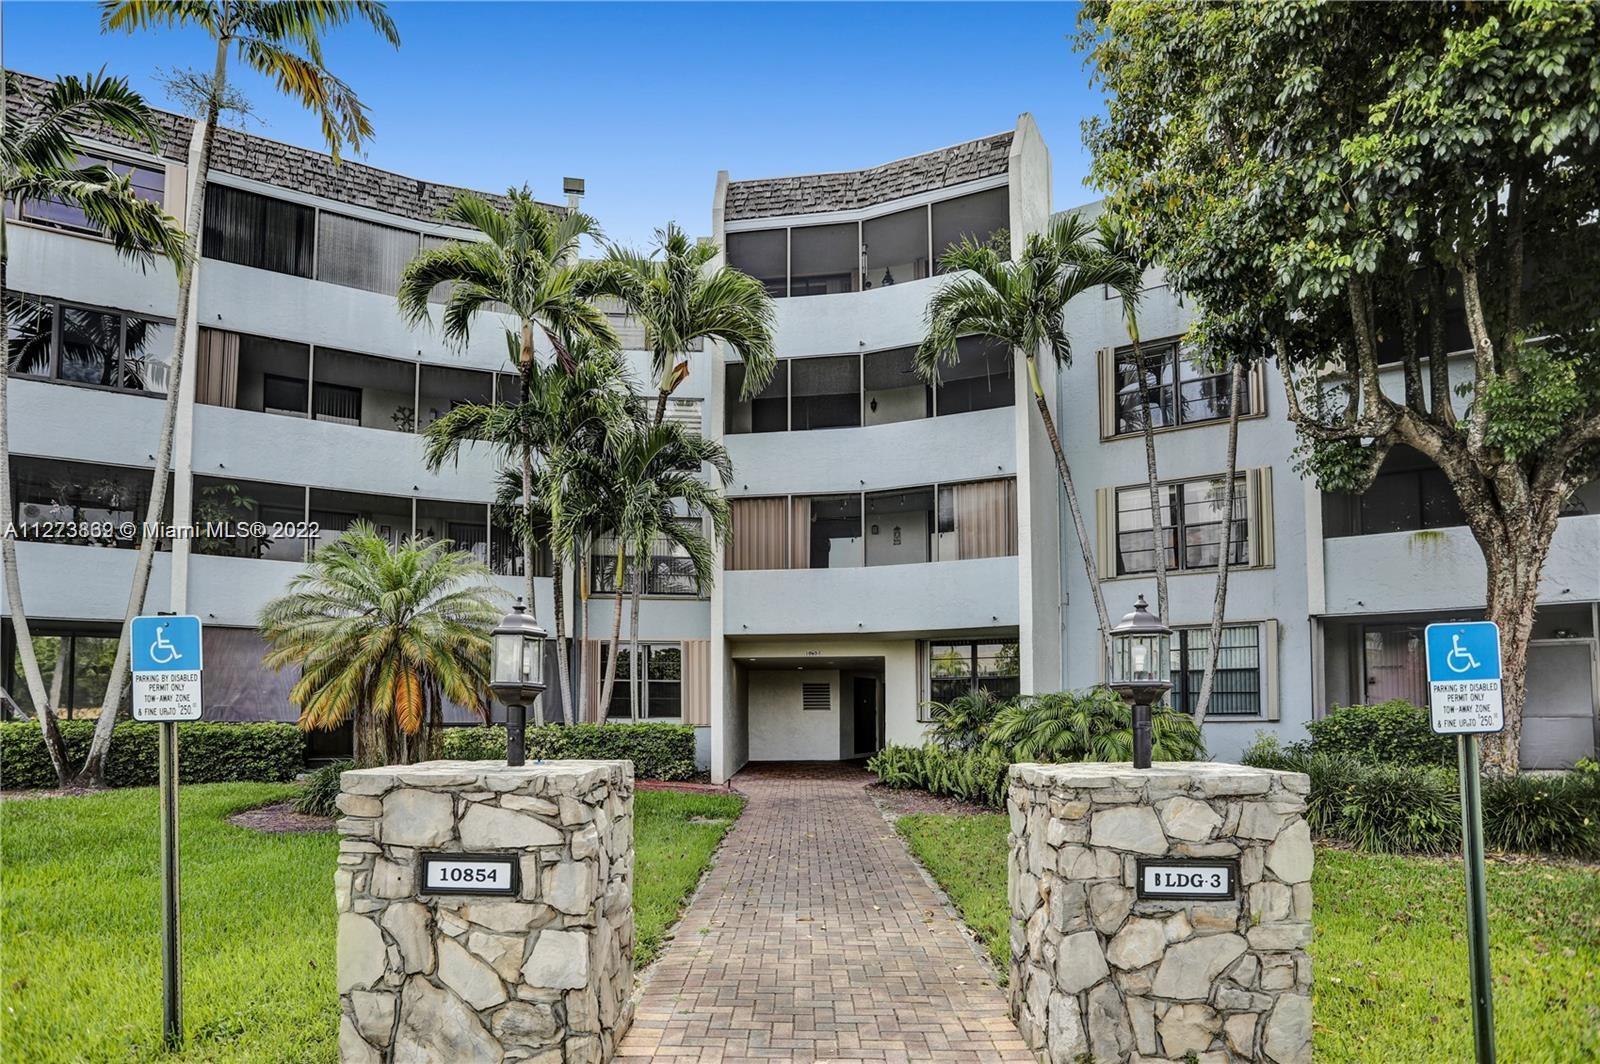 Excellent Location in East Kendall! Desirable neighborhood Kendall Gate Condo. This amazing 4th Floor Corner has spacious L-shaped balcony. Unit 2/2 with spacious master with walk-in closet. Amenities include tennis courts, pool, fitness center, and clubhouse. Kendall Gate has a gated entrance with roaming security & and plenty of visitors guest parking. No leasing or pets allowed. Close to everything!!! MDCC, Dadeland Mall, Hospitals, and expressways. This one won't last long!
Directions: From Kendall Dr. and 107 Ave. The community is on the left heading west on Kendall Dr.